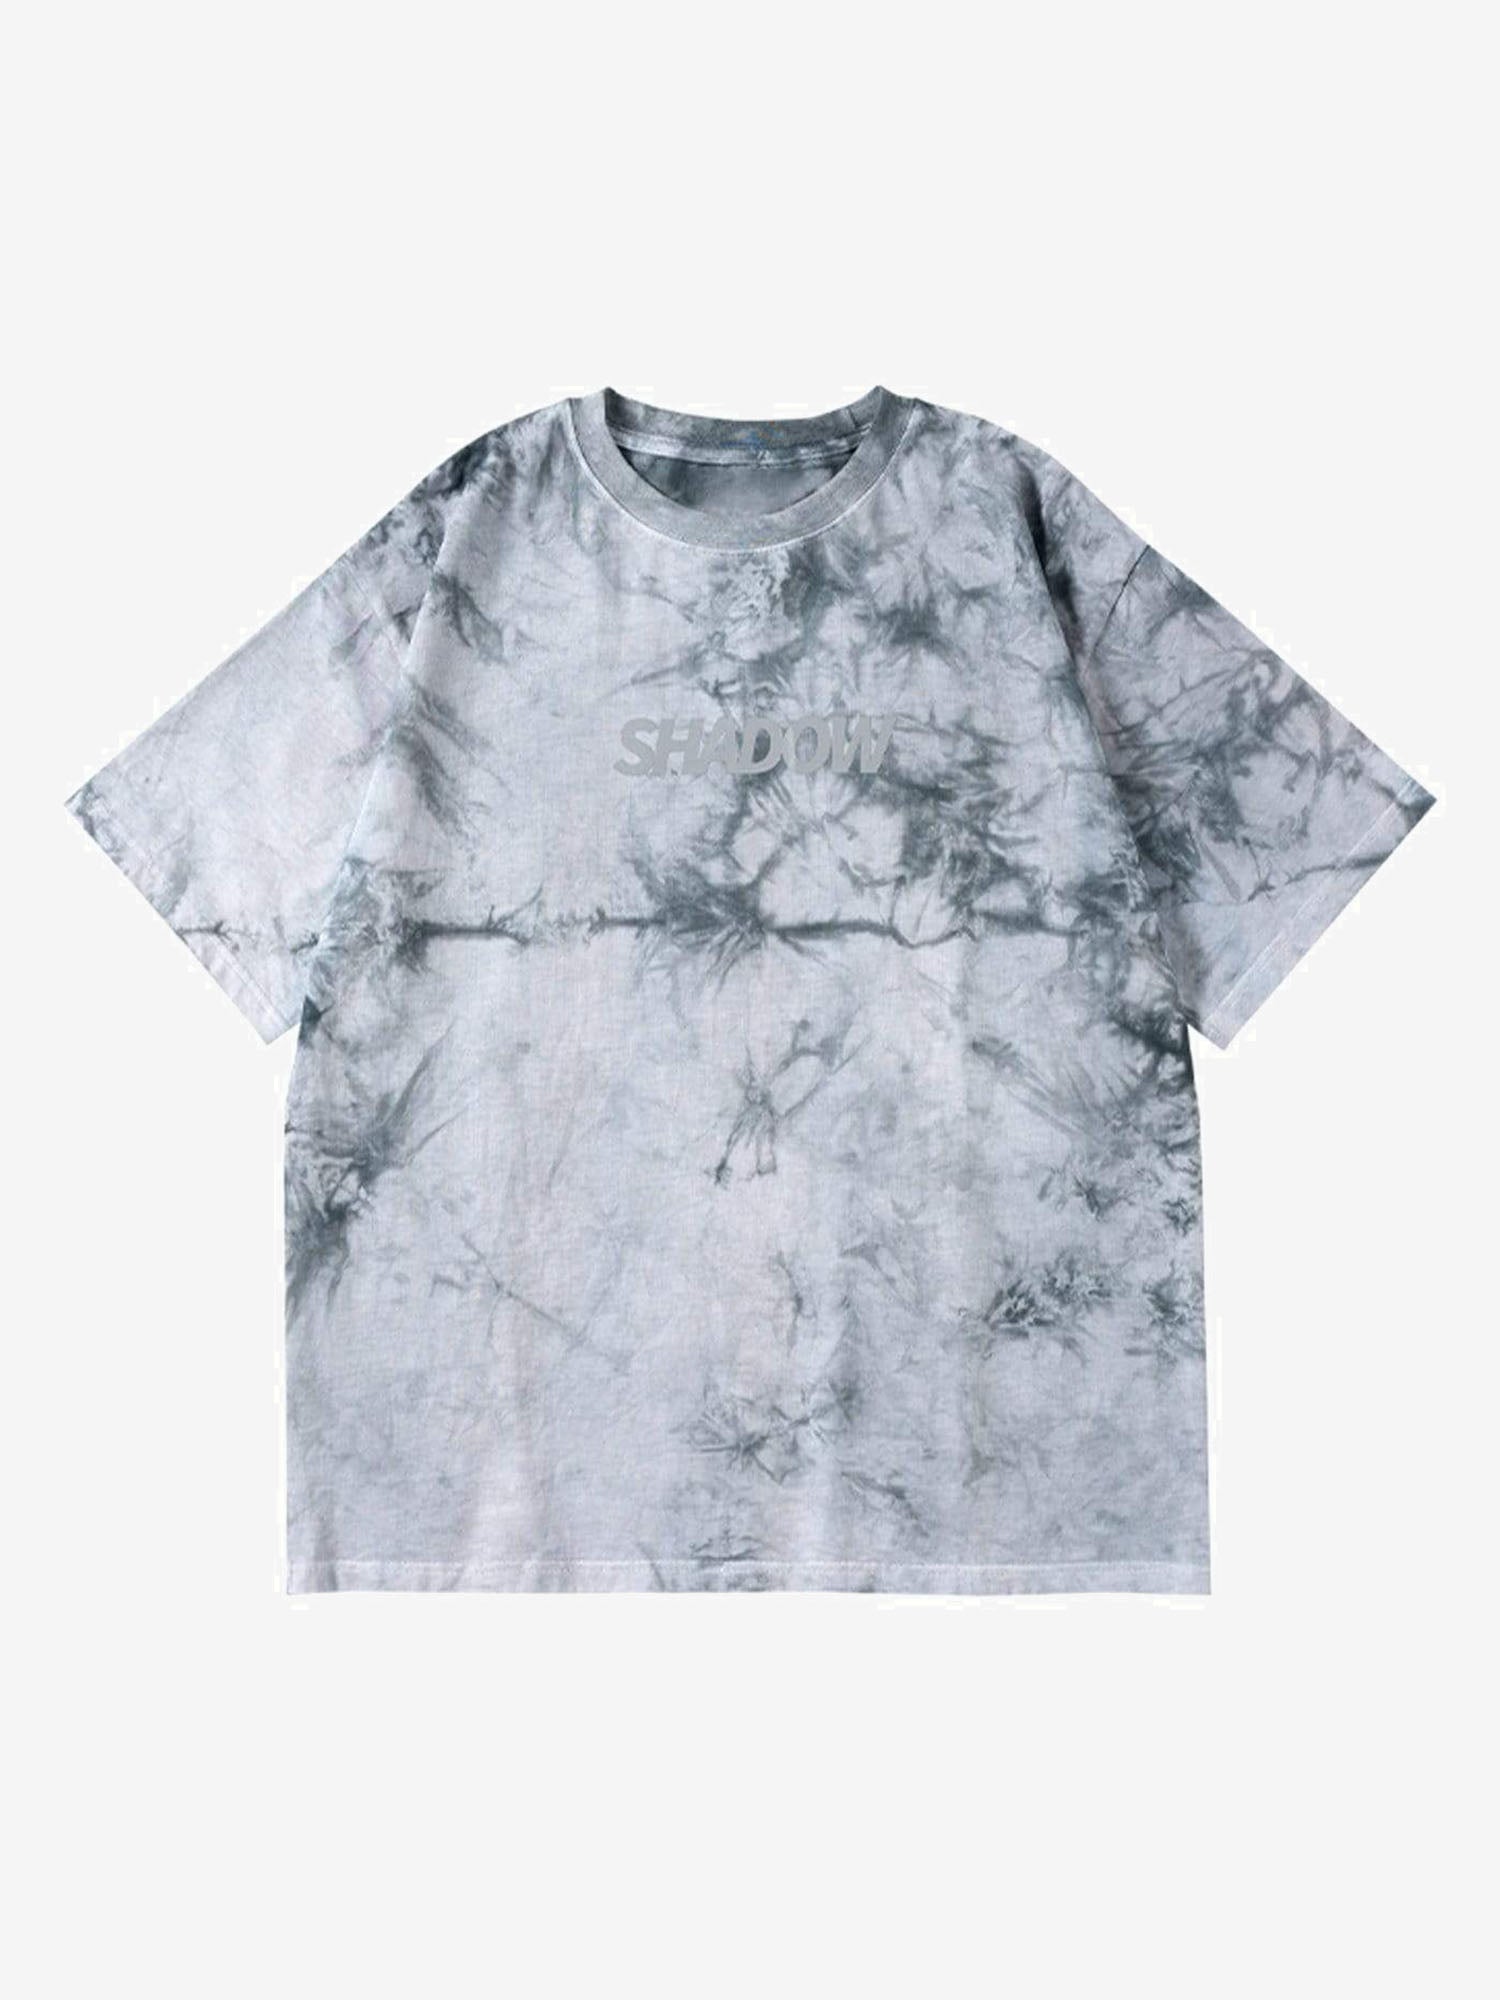 JUSTNOTAG Reflective Letters Cotton Graphic Tie-Dye Short Sleeve Tee